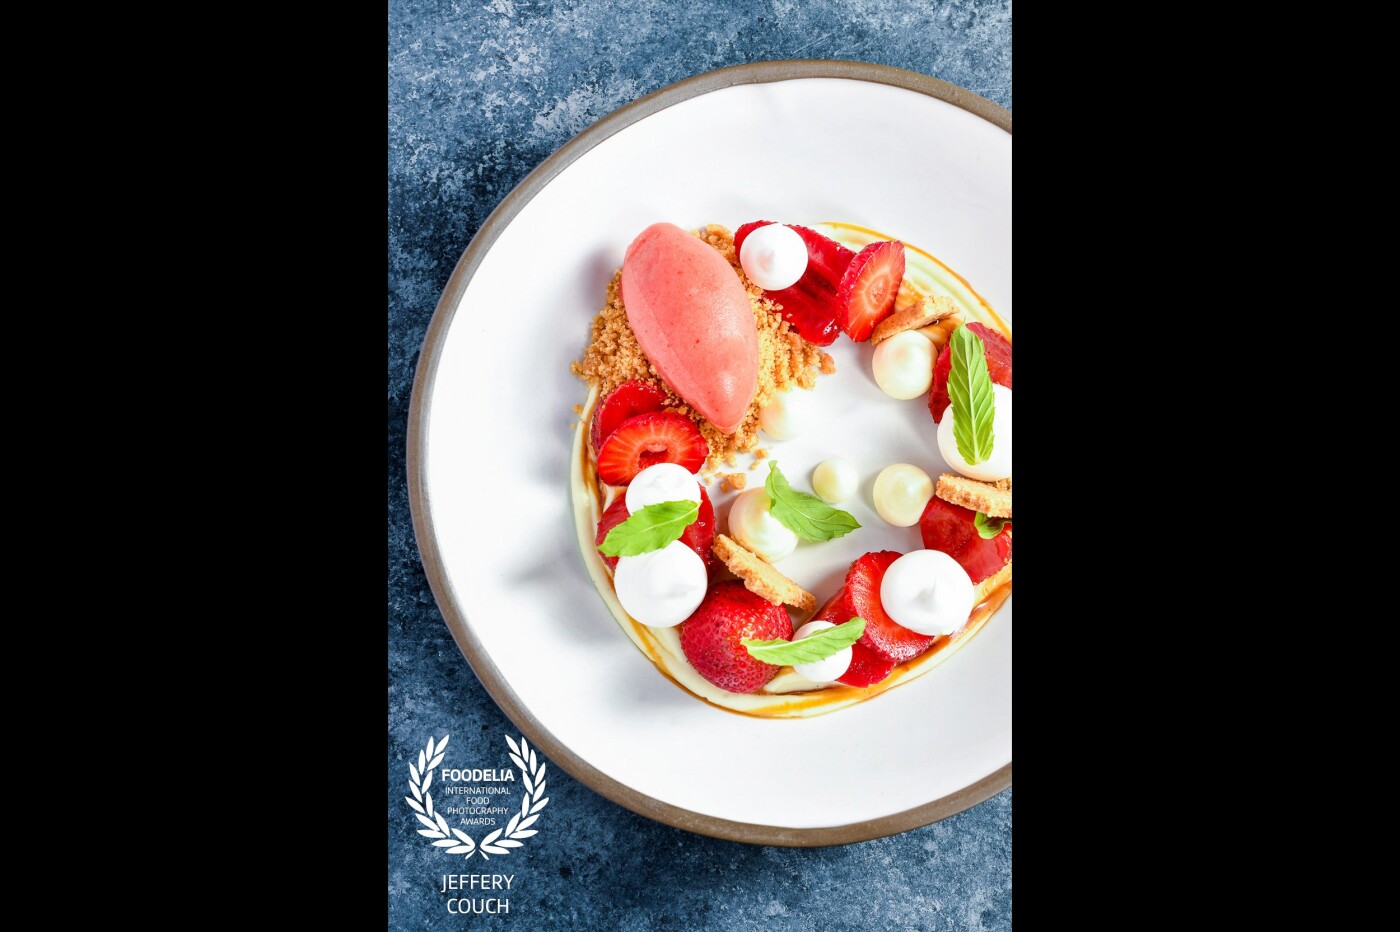 Photo shoot for two-star Michelin Chef Josiah Citrin was used in a promotional presentation of the new Openaire restaurant in Los Angeles. Quenelle of berry gelato, graham crust, fresh berries, mint and meringue.<br />
@josiahcitrin<br />
@jeffcouchfood